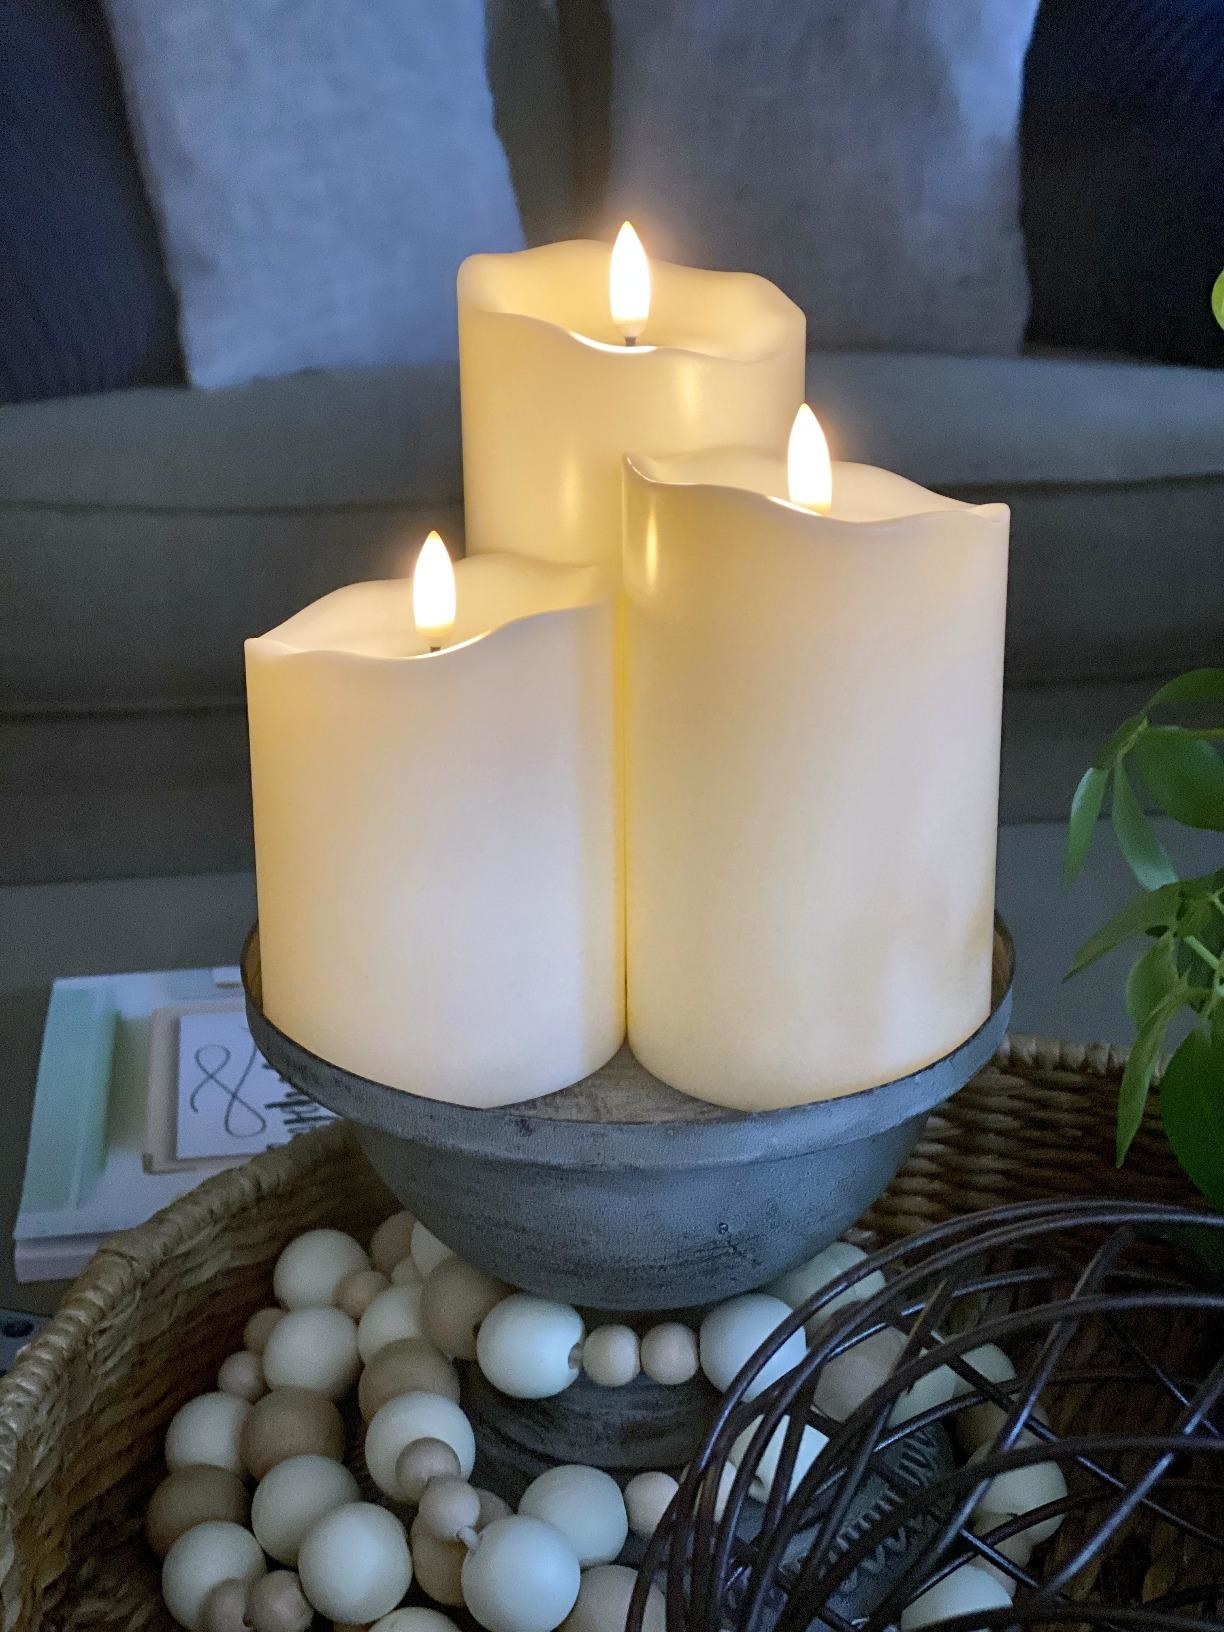 Reviewer image of three candles on a pedestal